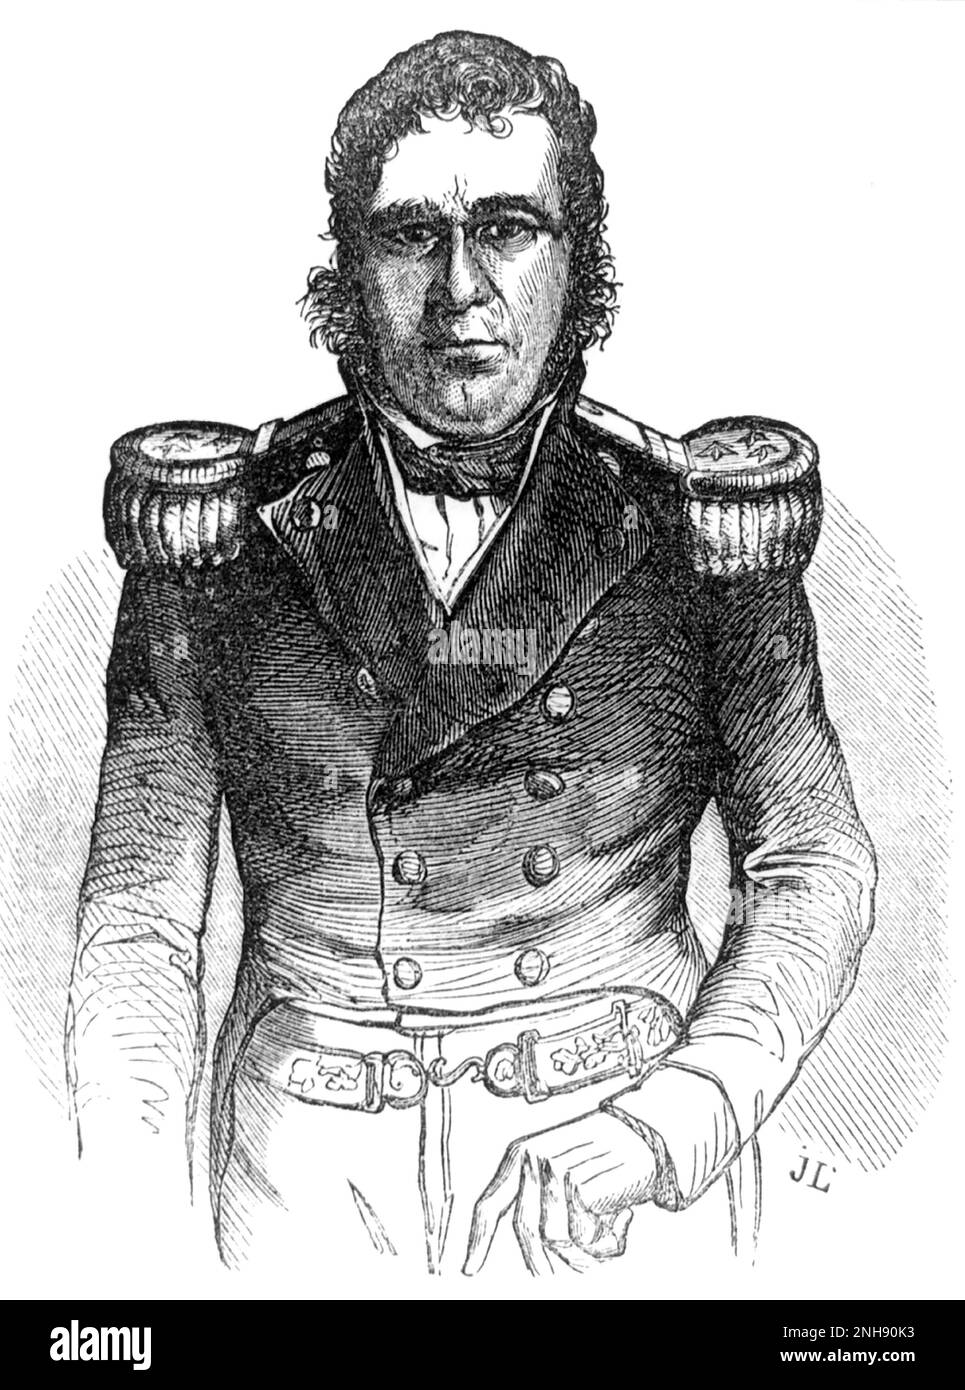 Pedro Santana (1801-1864), illustration from Gleason's Pictorial, 1854. Pedro Santana y Familias was a Dominican military commander and royalist politician who served as the president of the junta that had established the First Dominican Republic, a precursor to the position of the President of the Dominican Republic. Santana was a lifelong supporter of the Dominican revolt against the Haitian occupation and a general during the Dominican War of Independence (1844-1856). Stock Photo